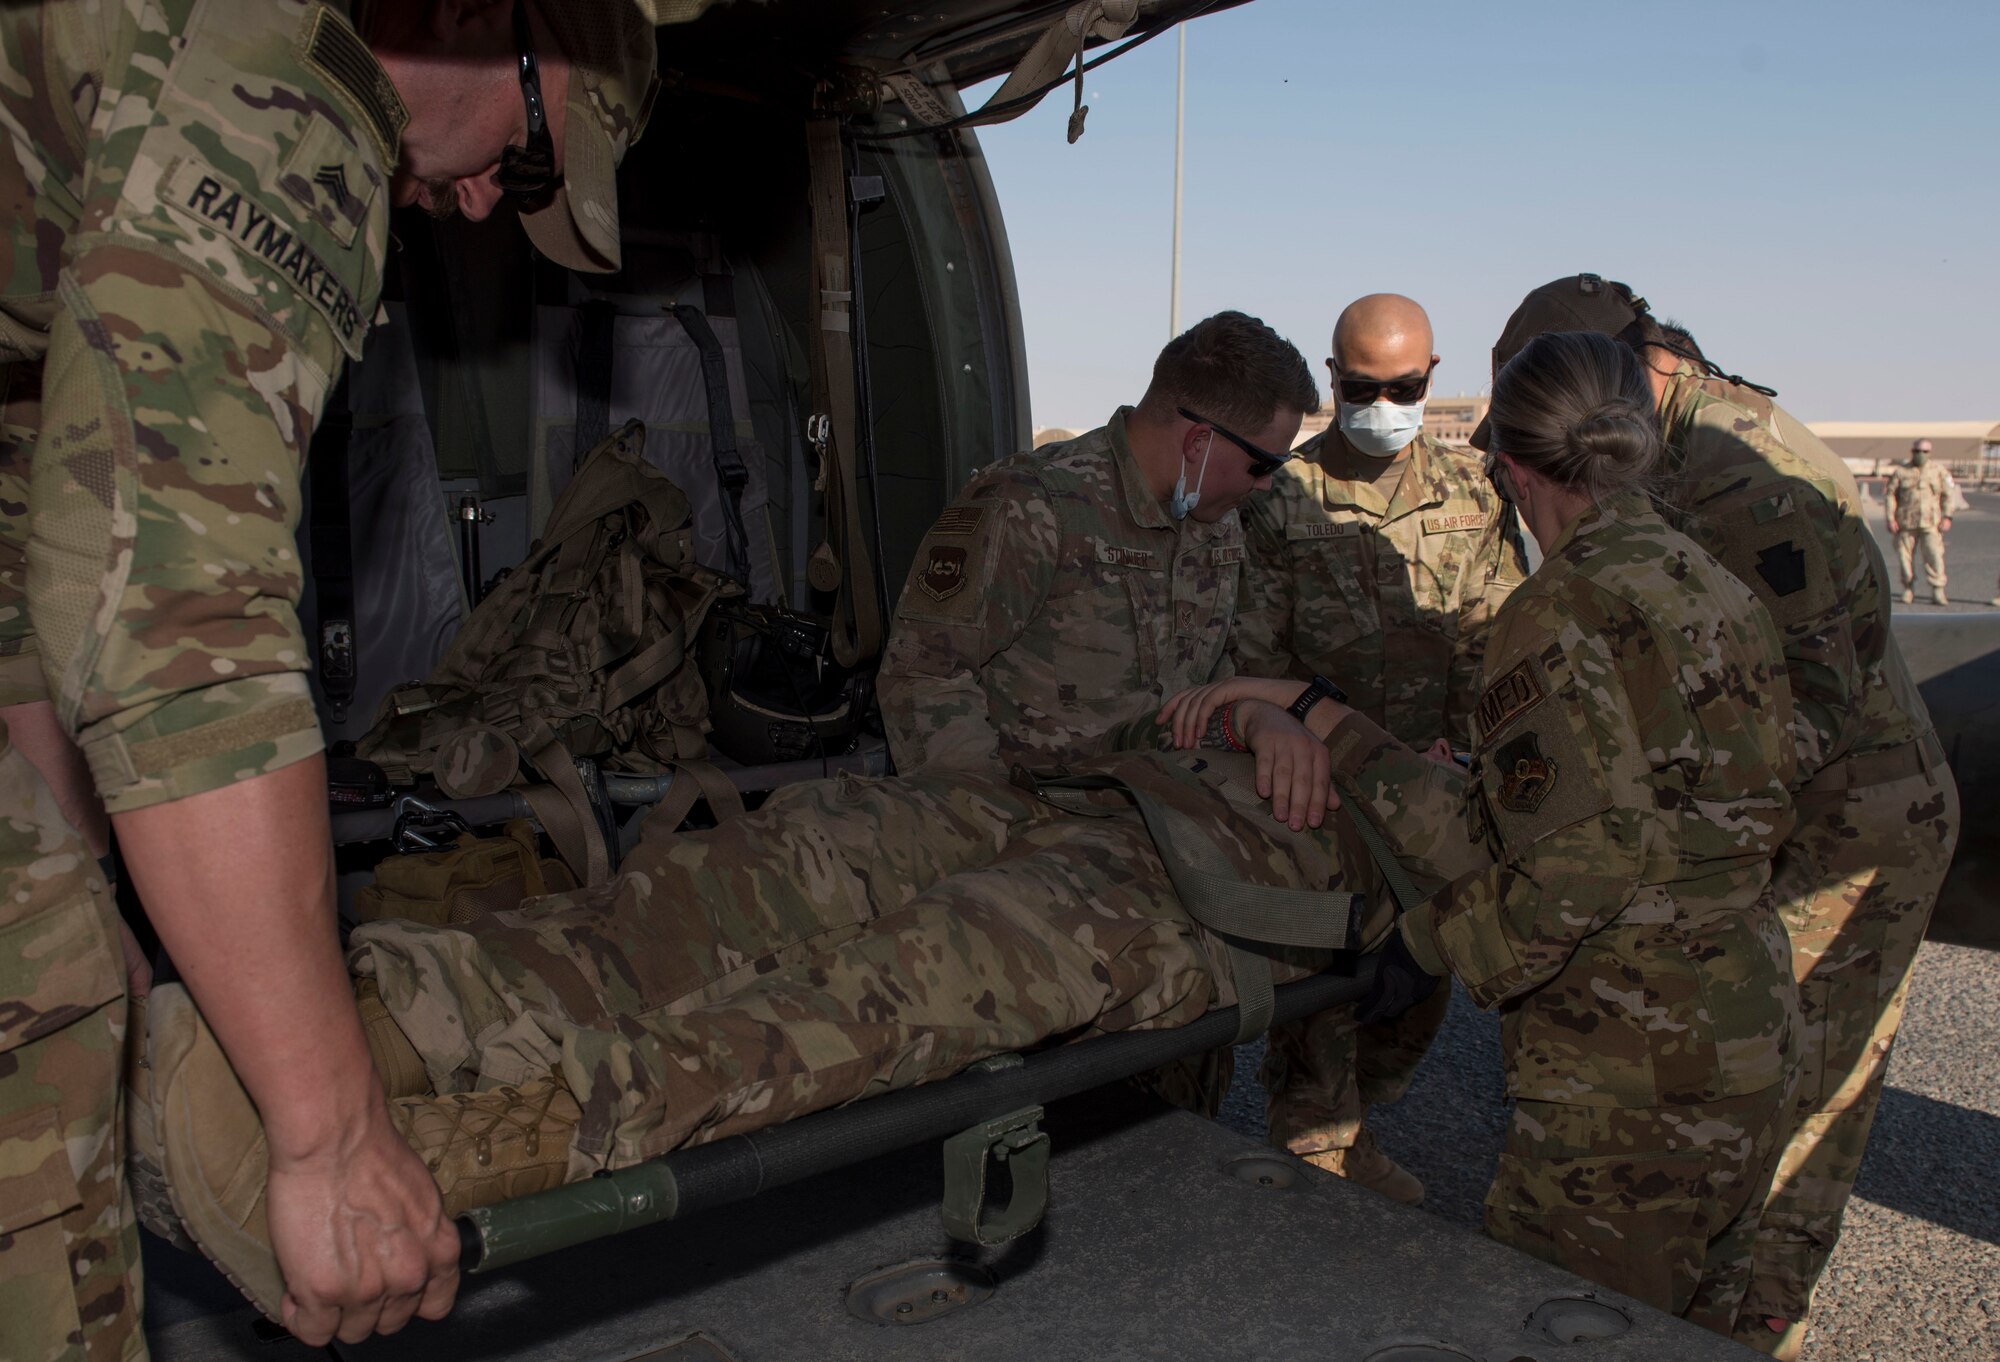 Medical personnel transfer a patient onto a UH-60 Black Hawk helicopter during a medical evacuation training exercise at Ali Al Salem Air Base, Kuwait, Oct. 27, 2020.